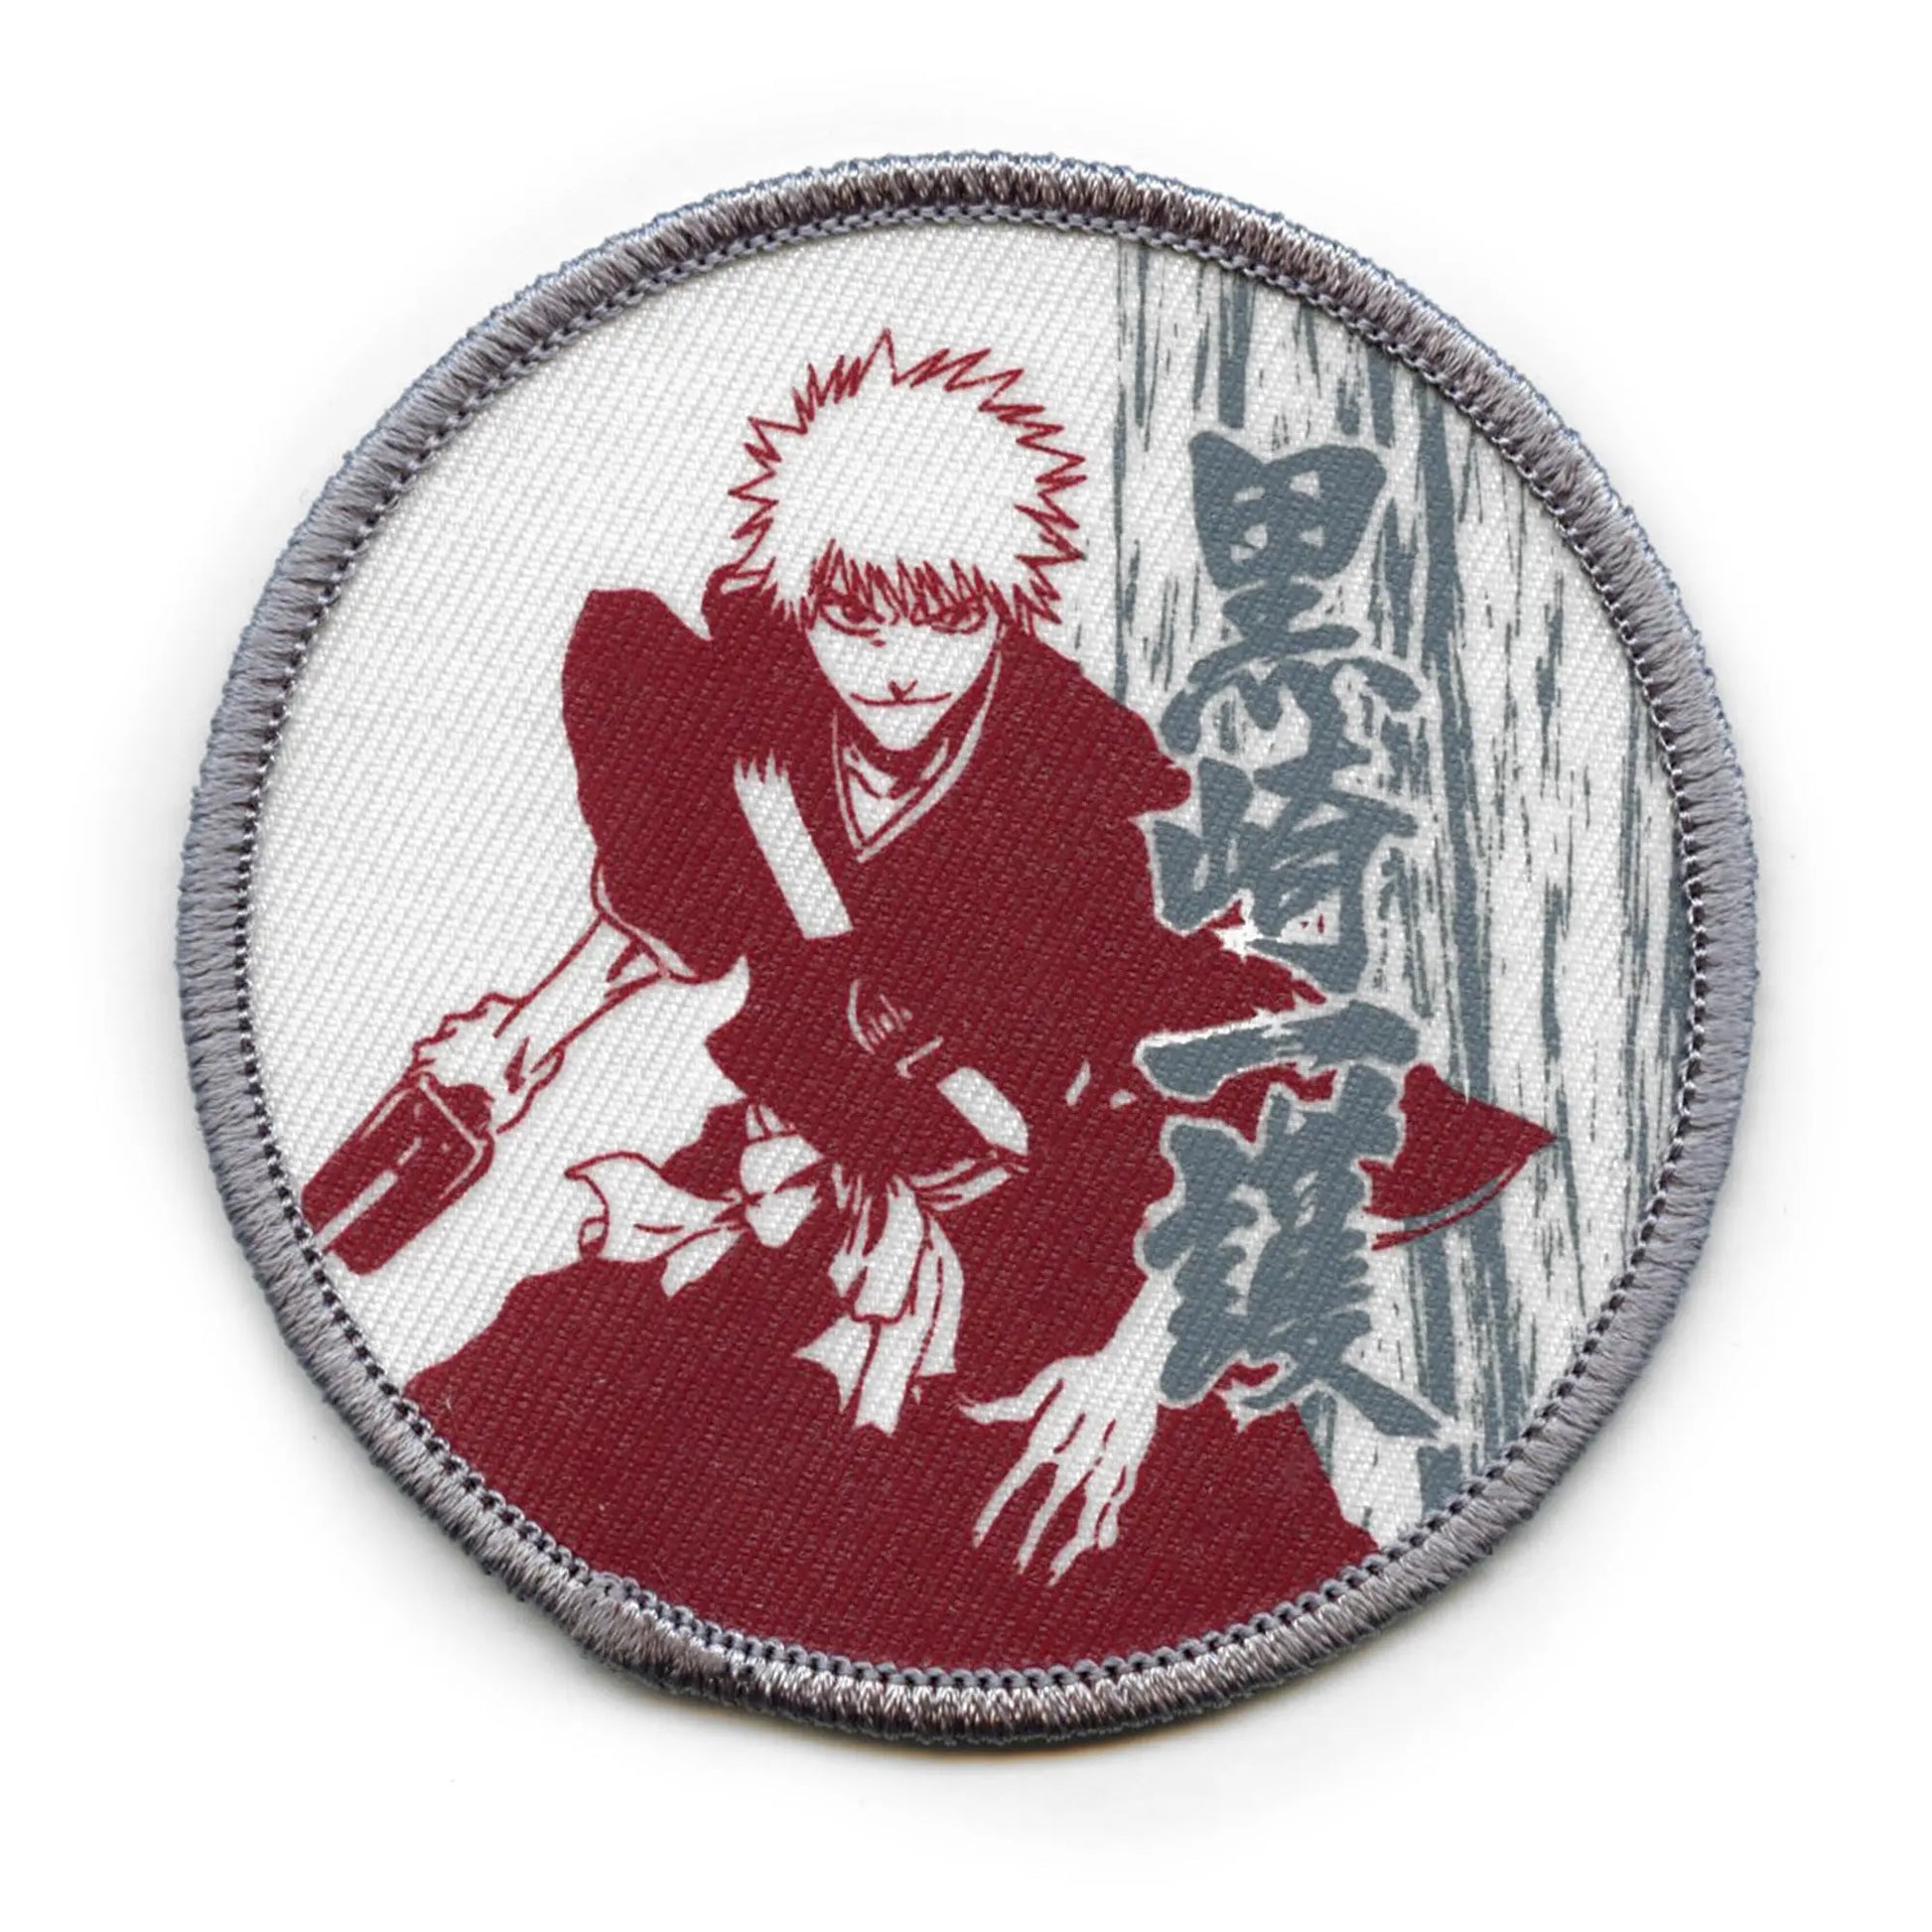 Bleach Ichigo With Sword Patch Dull Anime Round DTG Printed Iron On